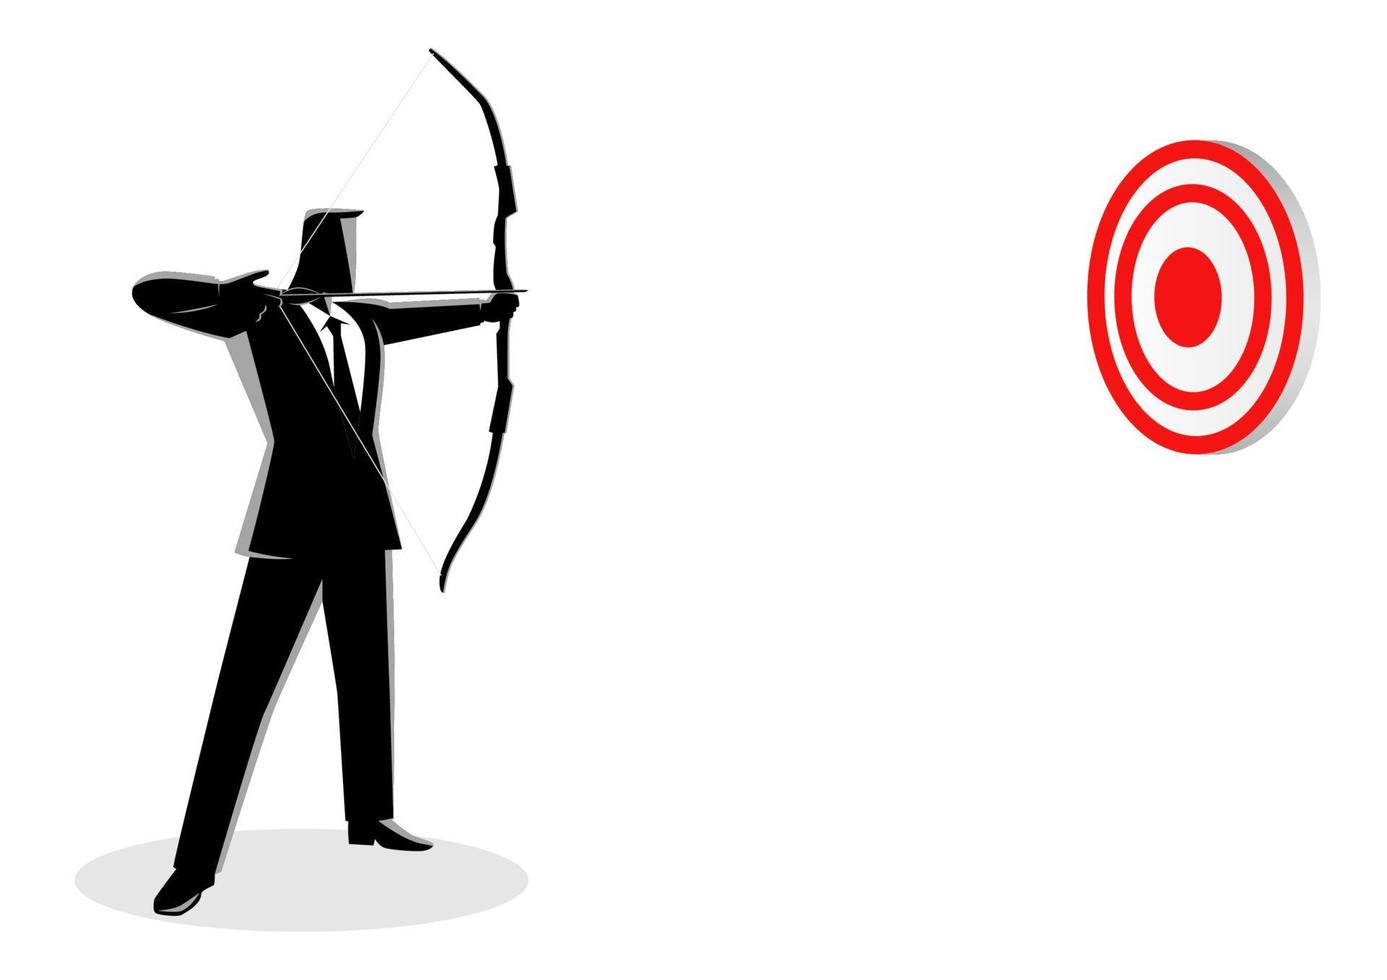 Business Target Icon vector